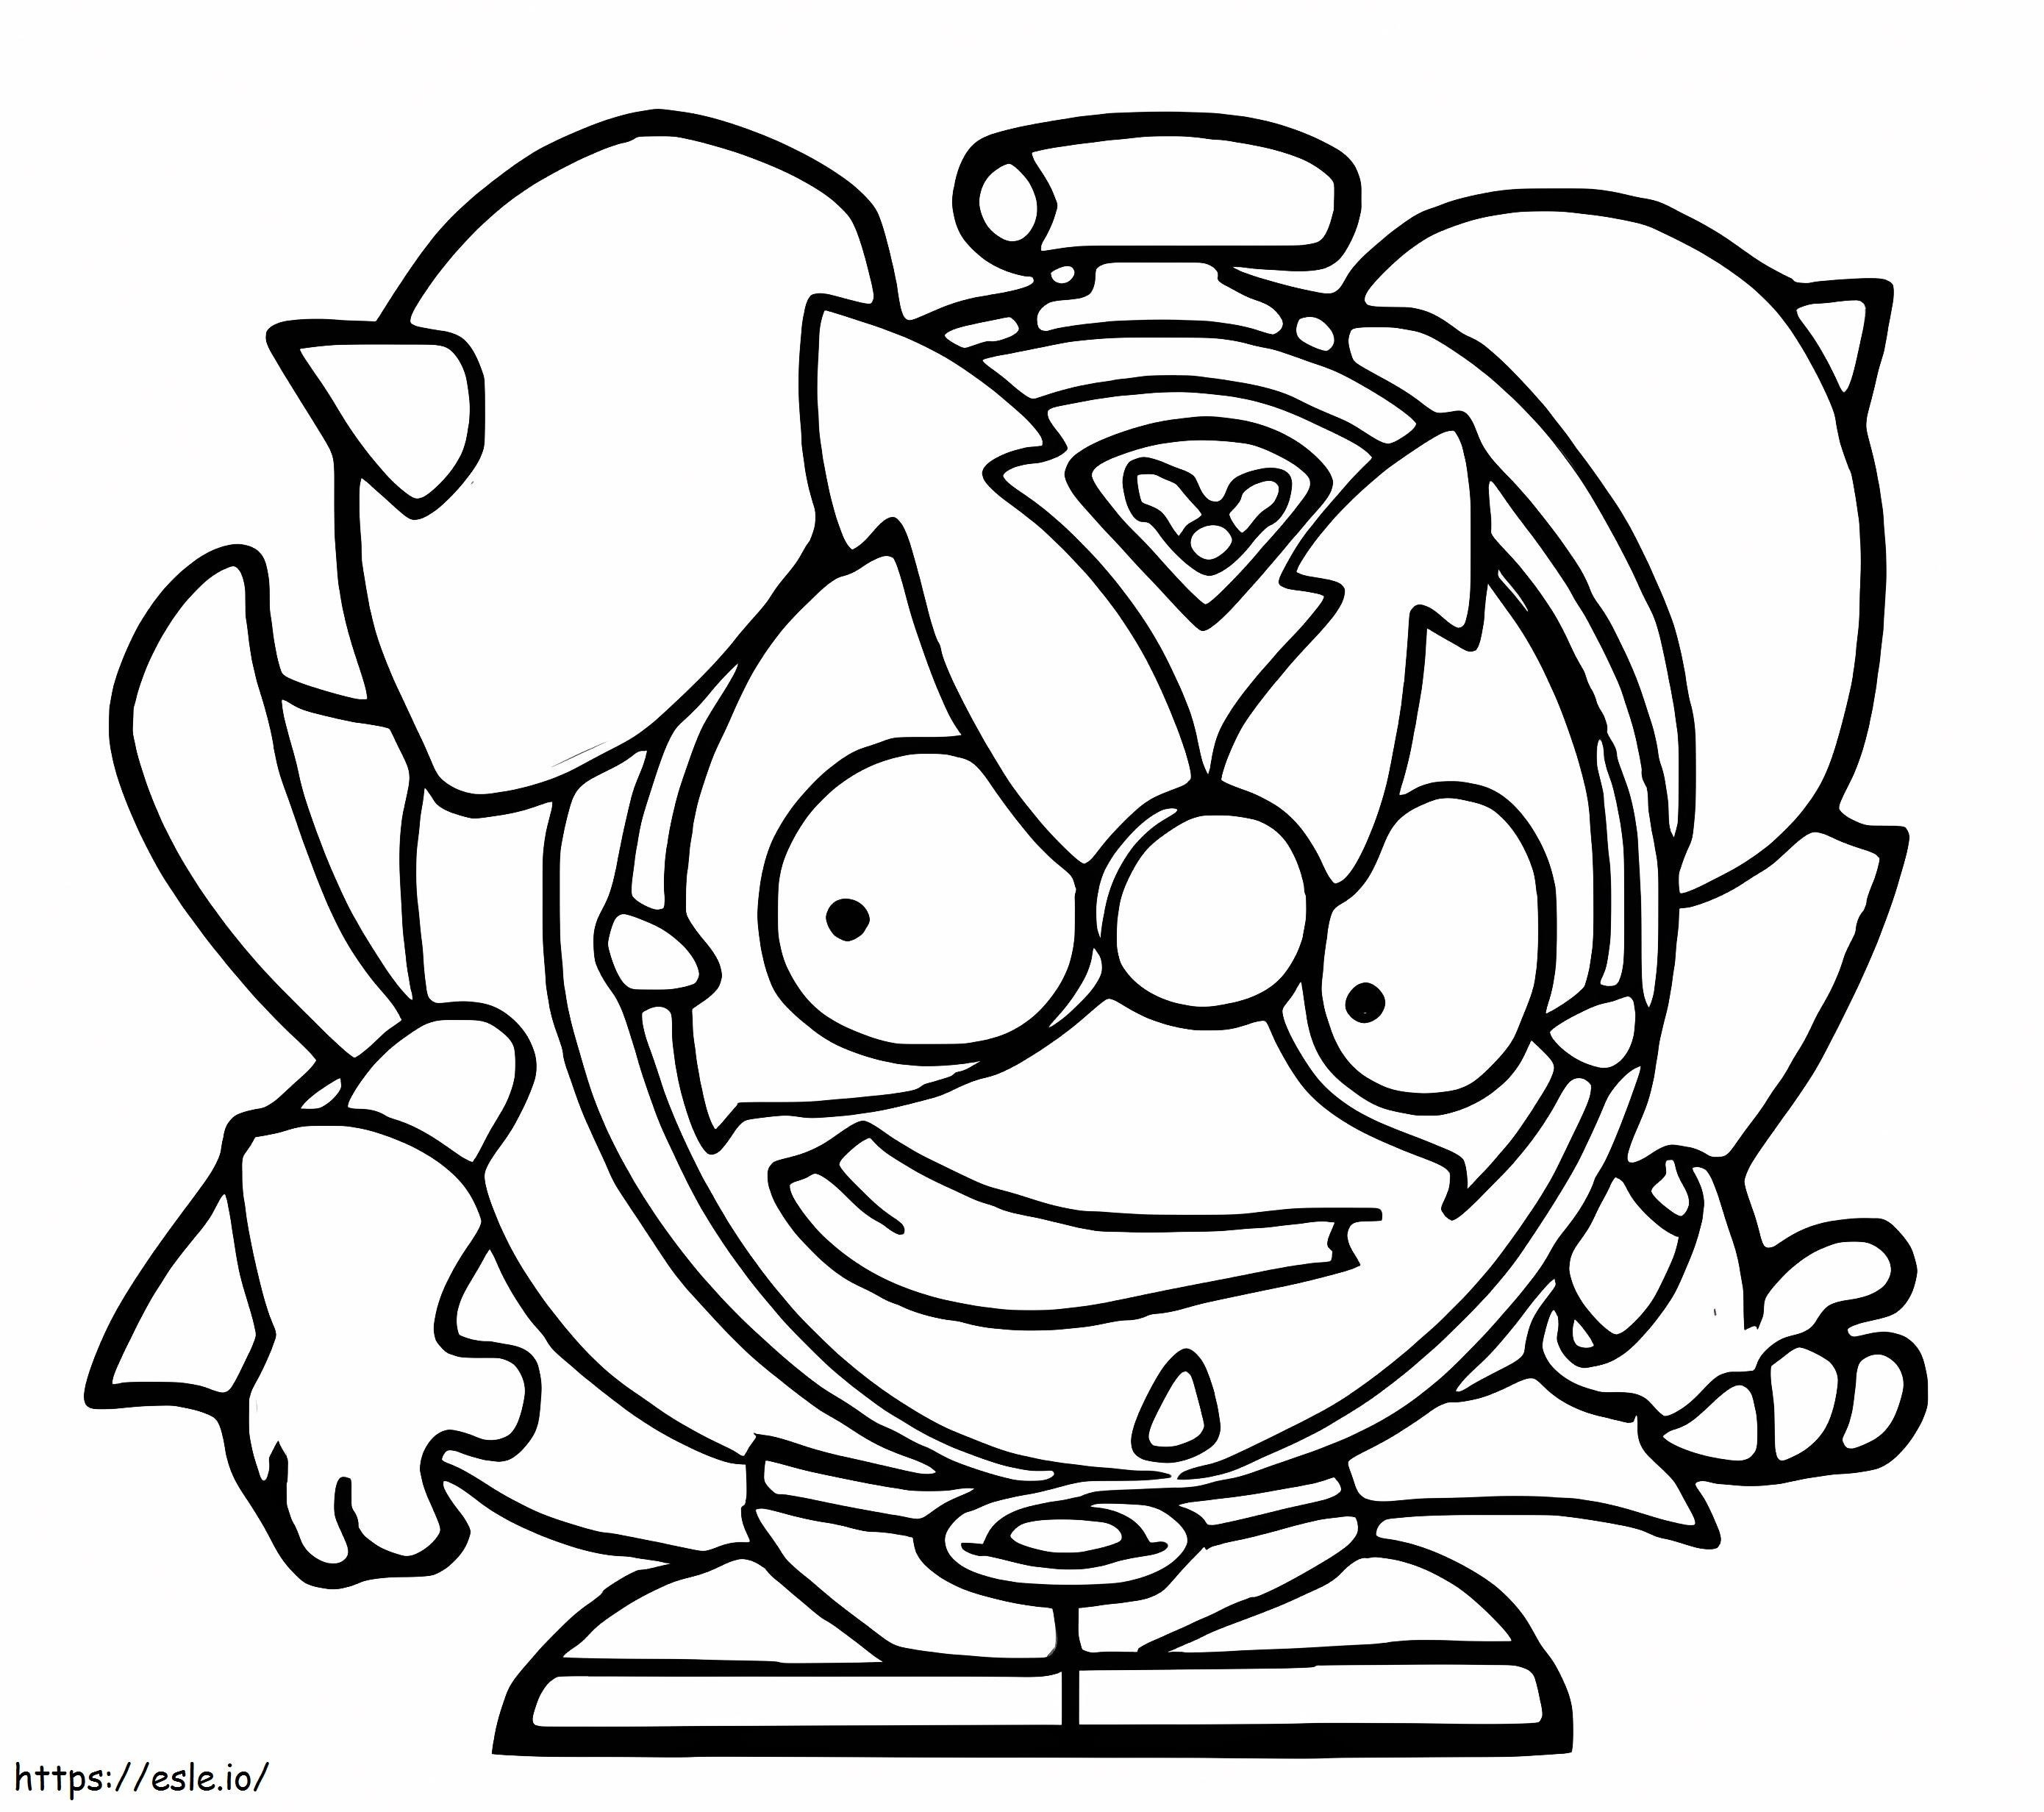 Ring Ding Superzings coloring page